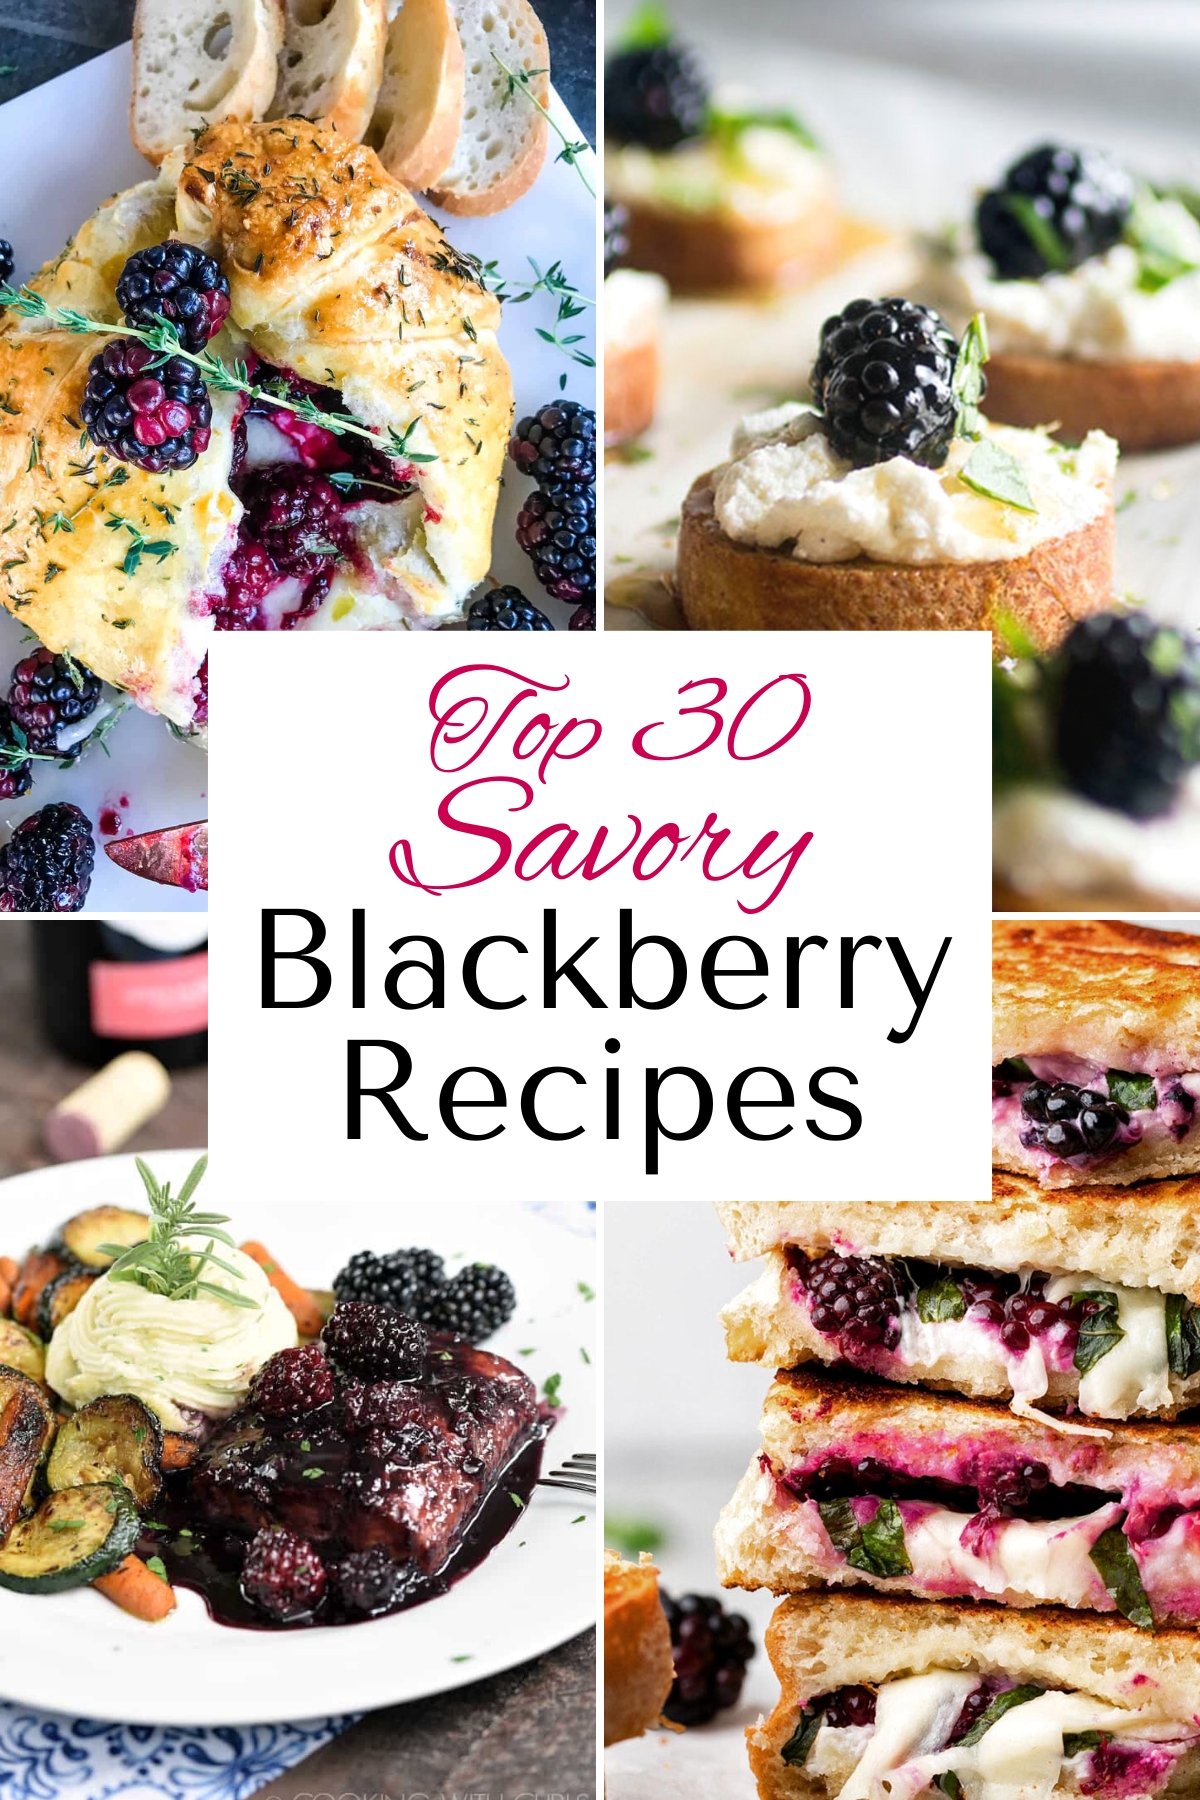 Pinterest collage of four recipes with title in the middle. Shown is brie and blackberries baked in puff pastry, blackberry and ricotta crostinis, blackberry grilled cheese sandwiches stacked high and a plate of potatoes and veggies with blackberry glazed salmon.